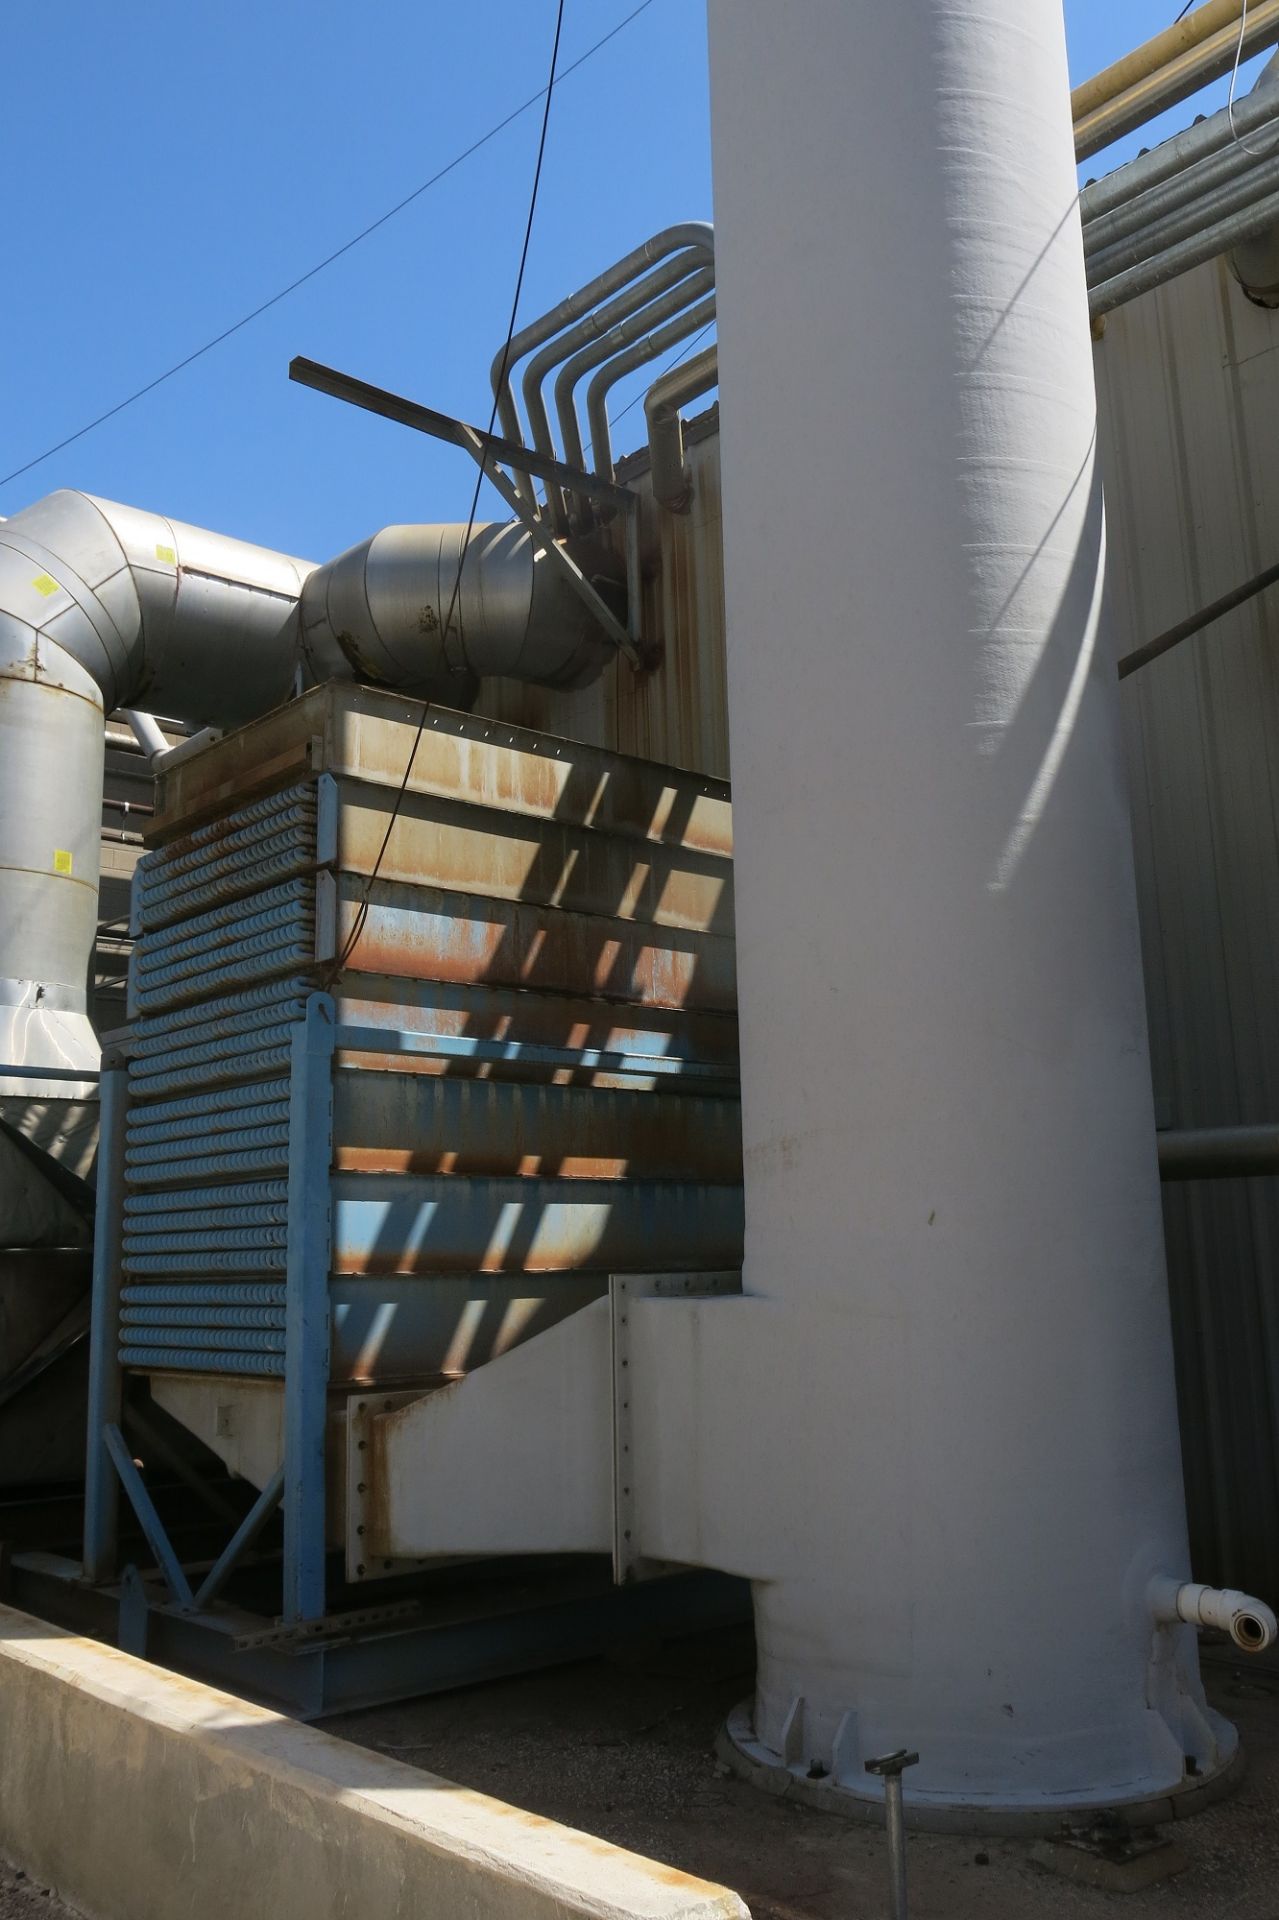 Heat Exchanger Associated with Boiler operation